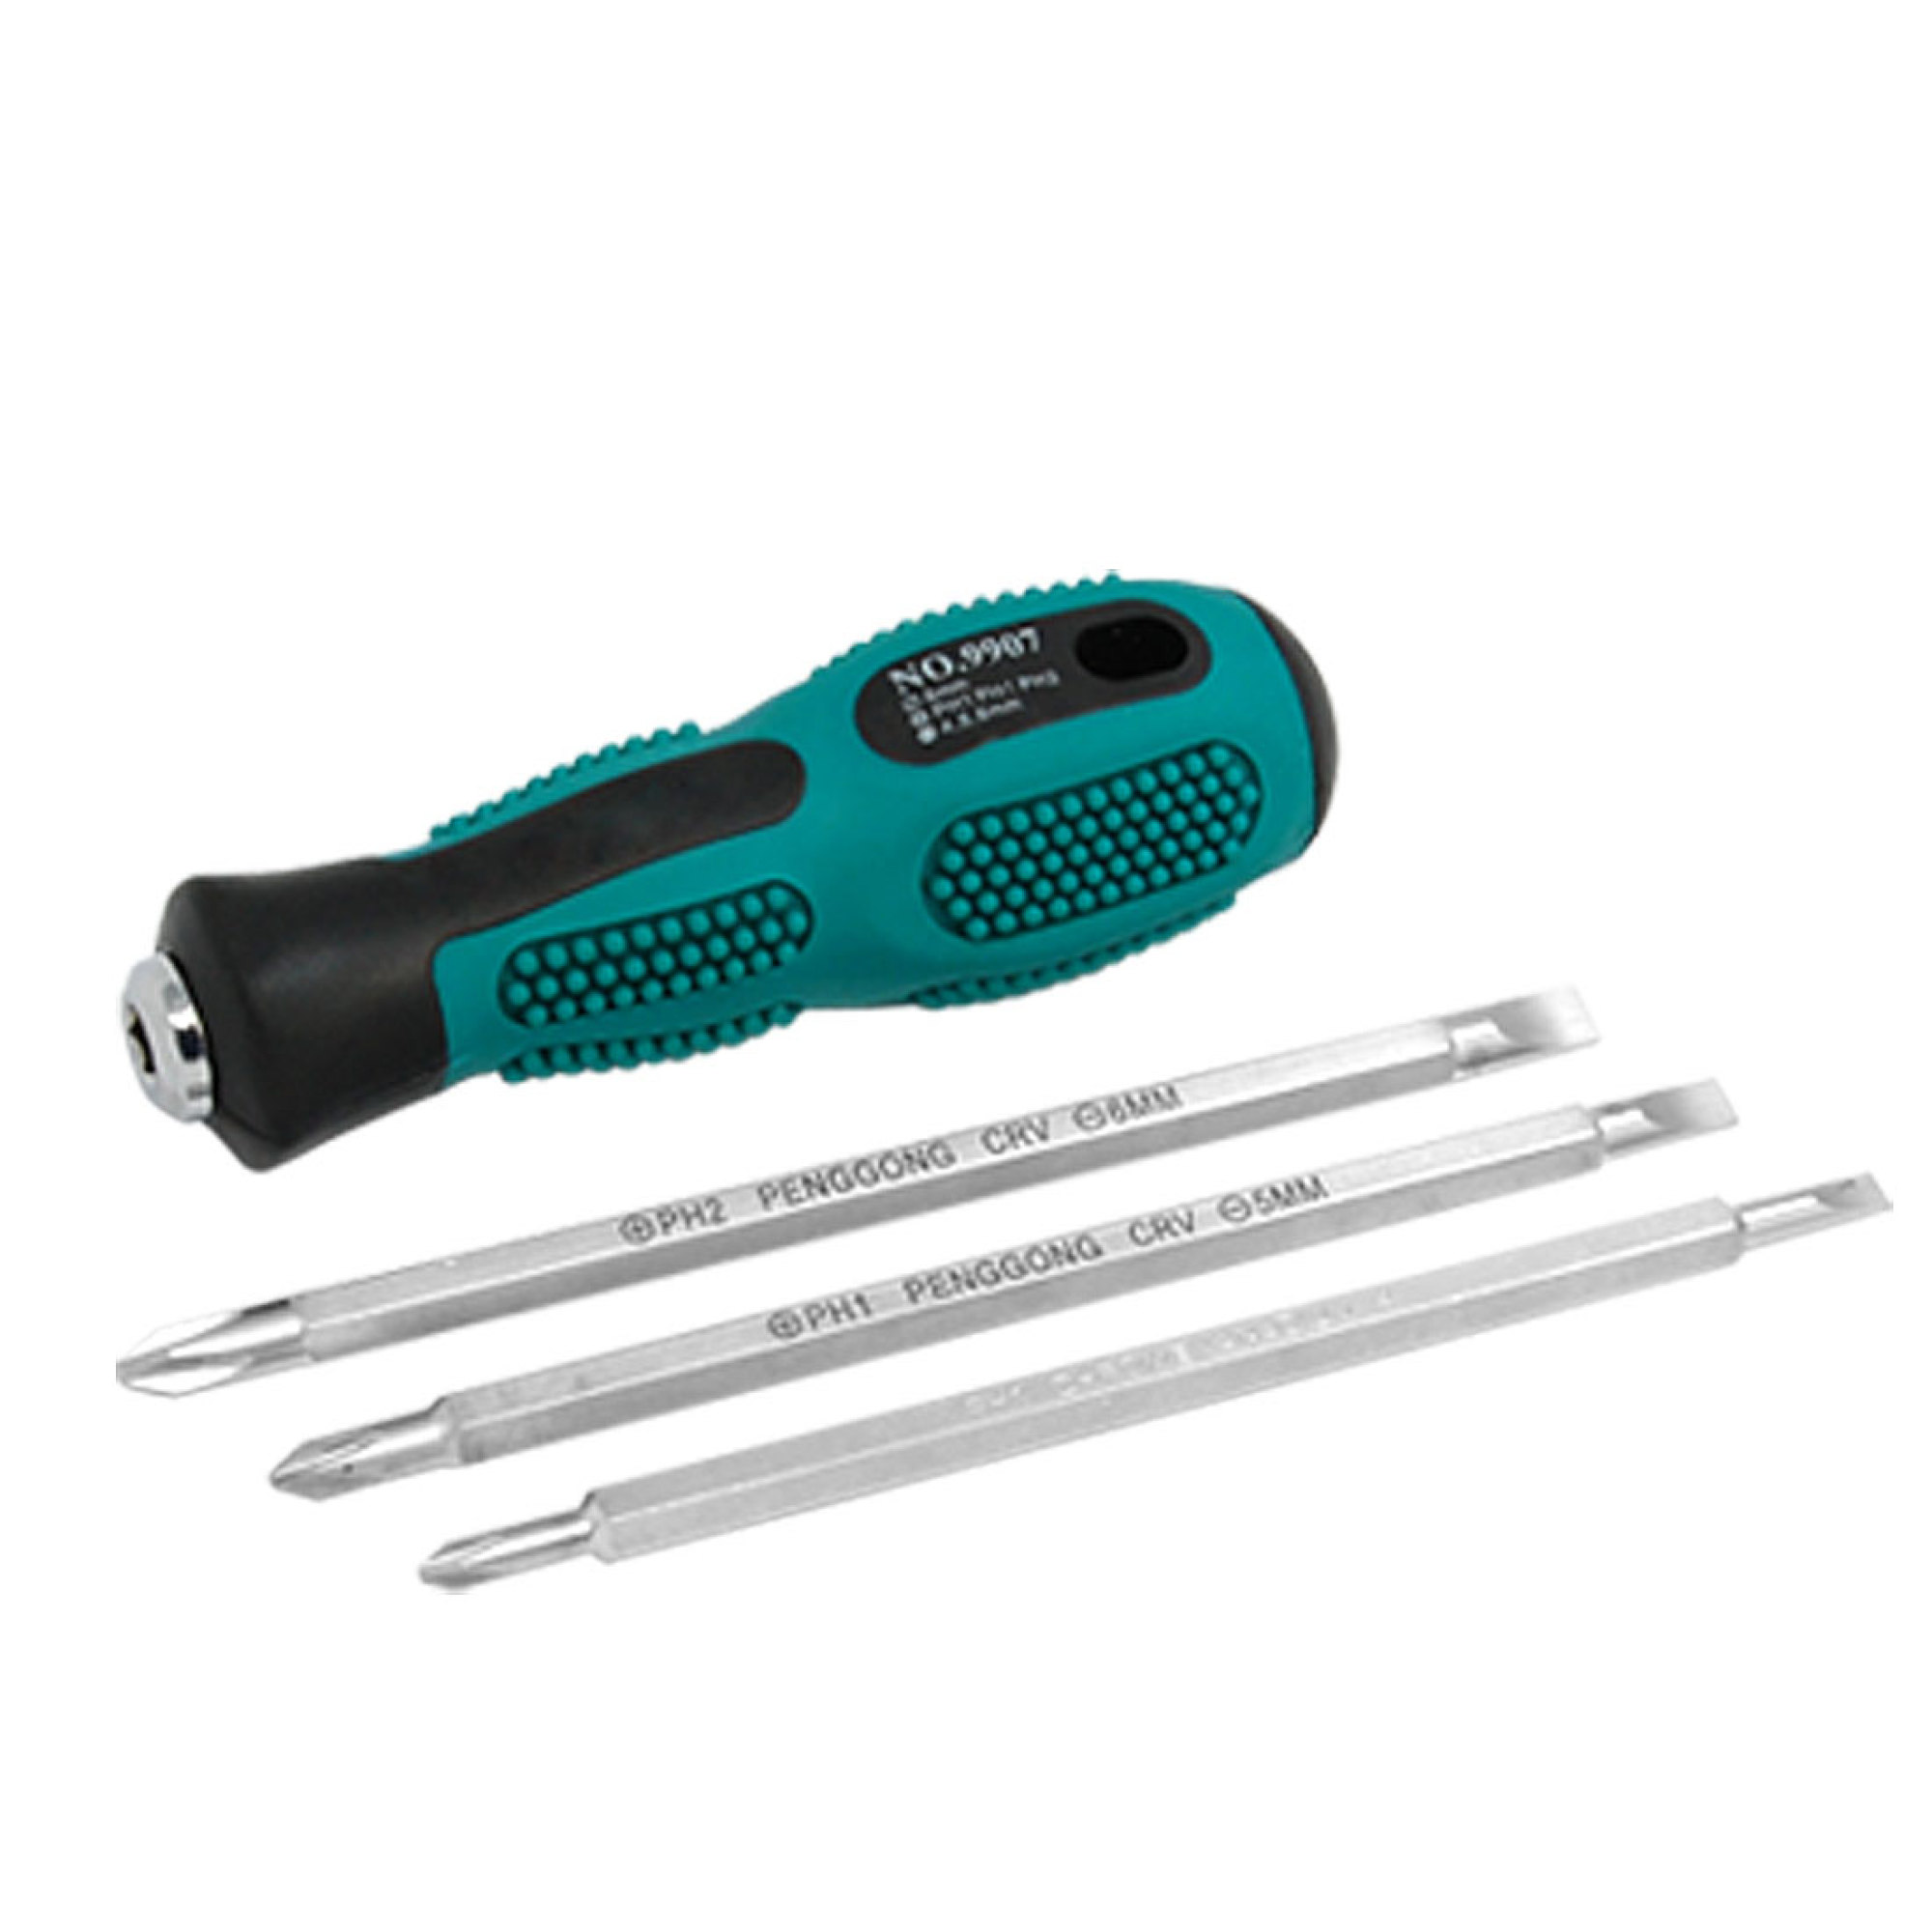 Reversible 2 Way Phillips Slotted Screwdriver Set